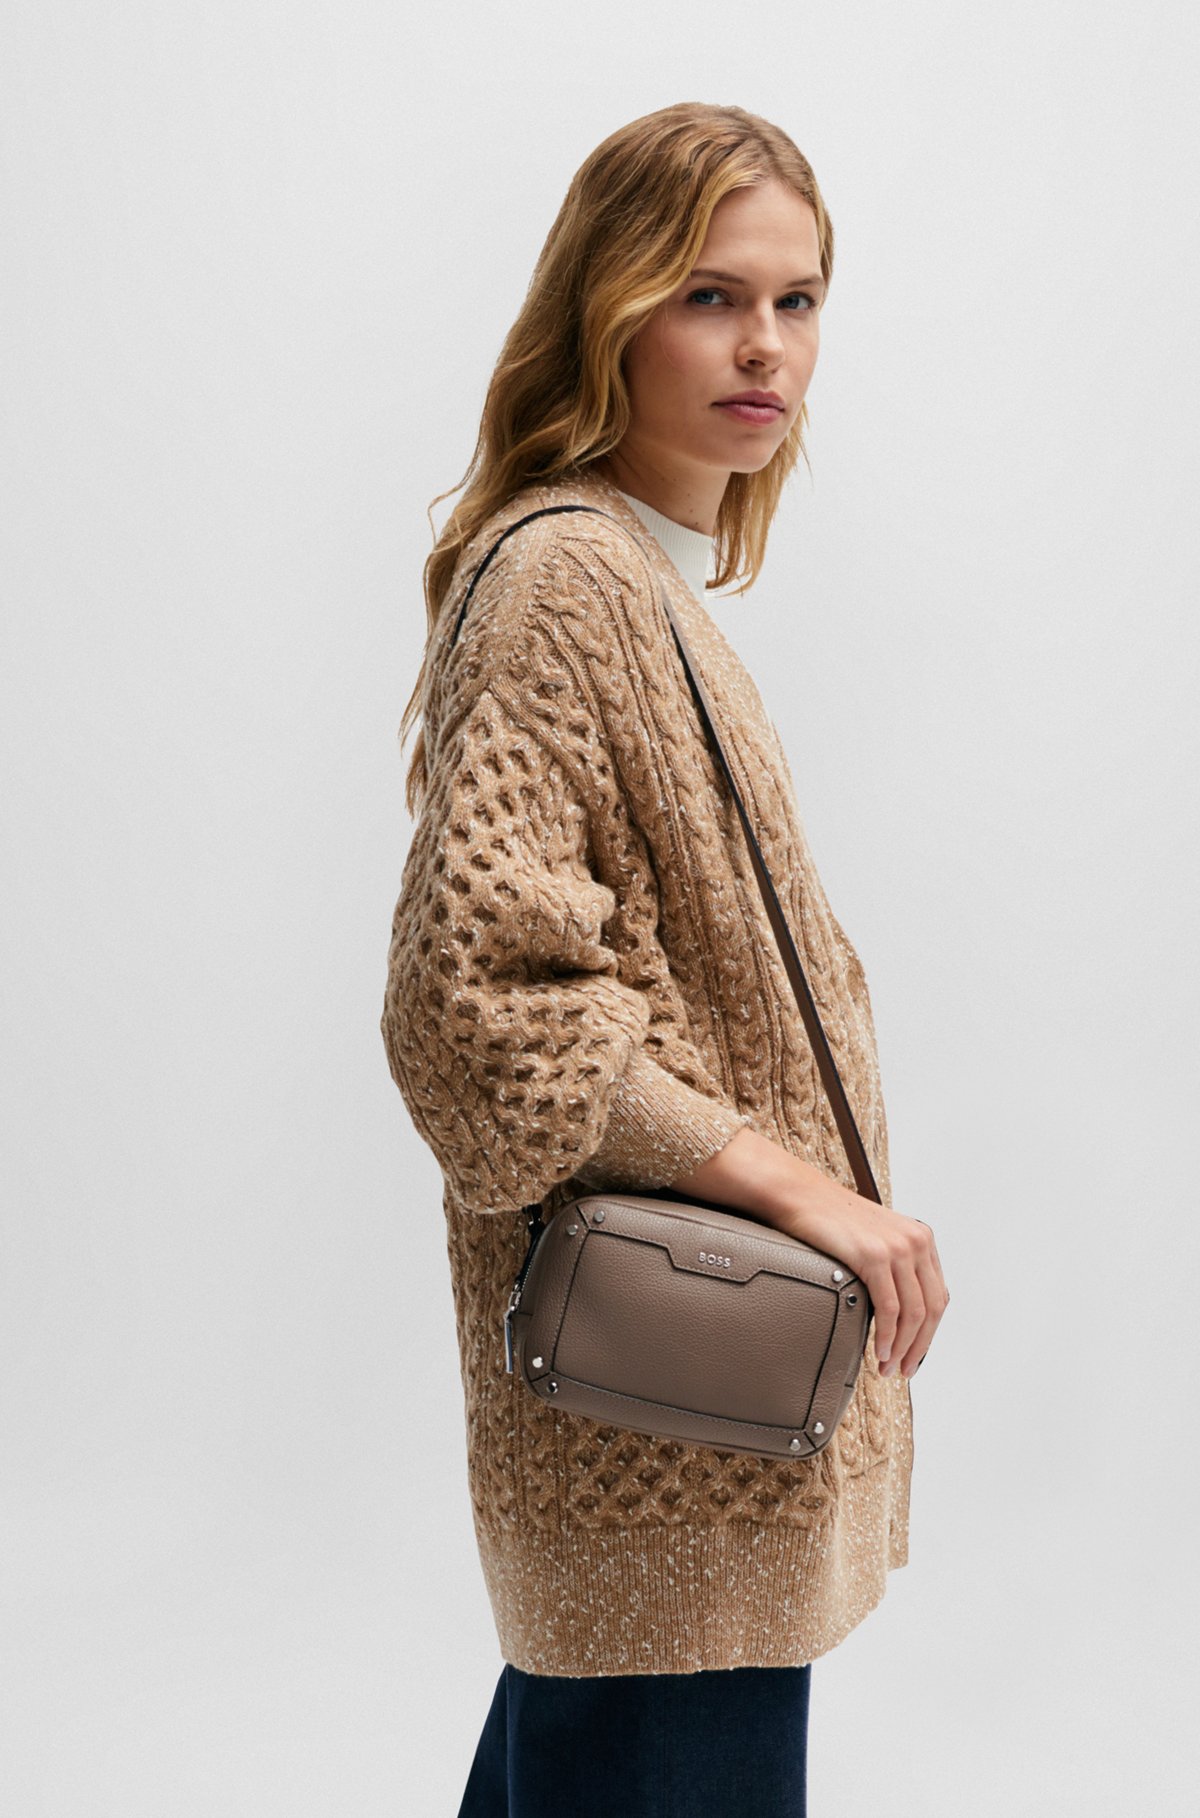 Grained-leather crossbody bag with branded hardware, Beige